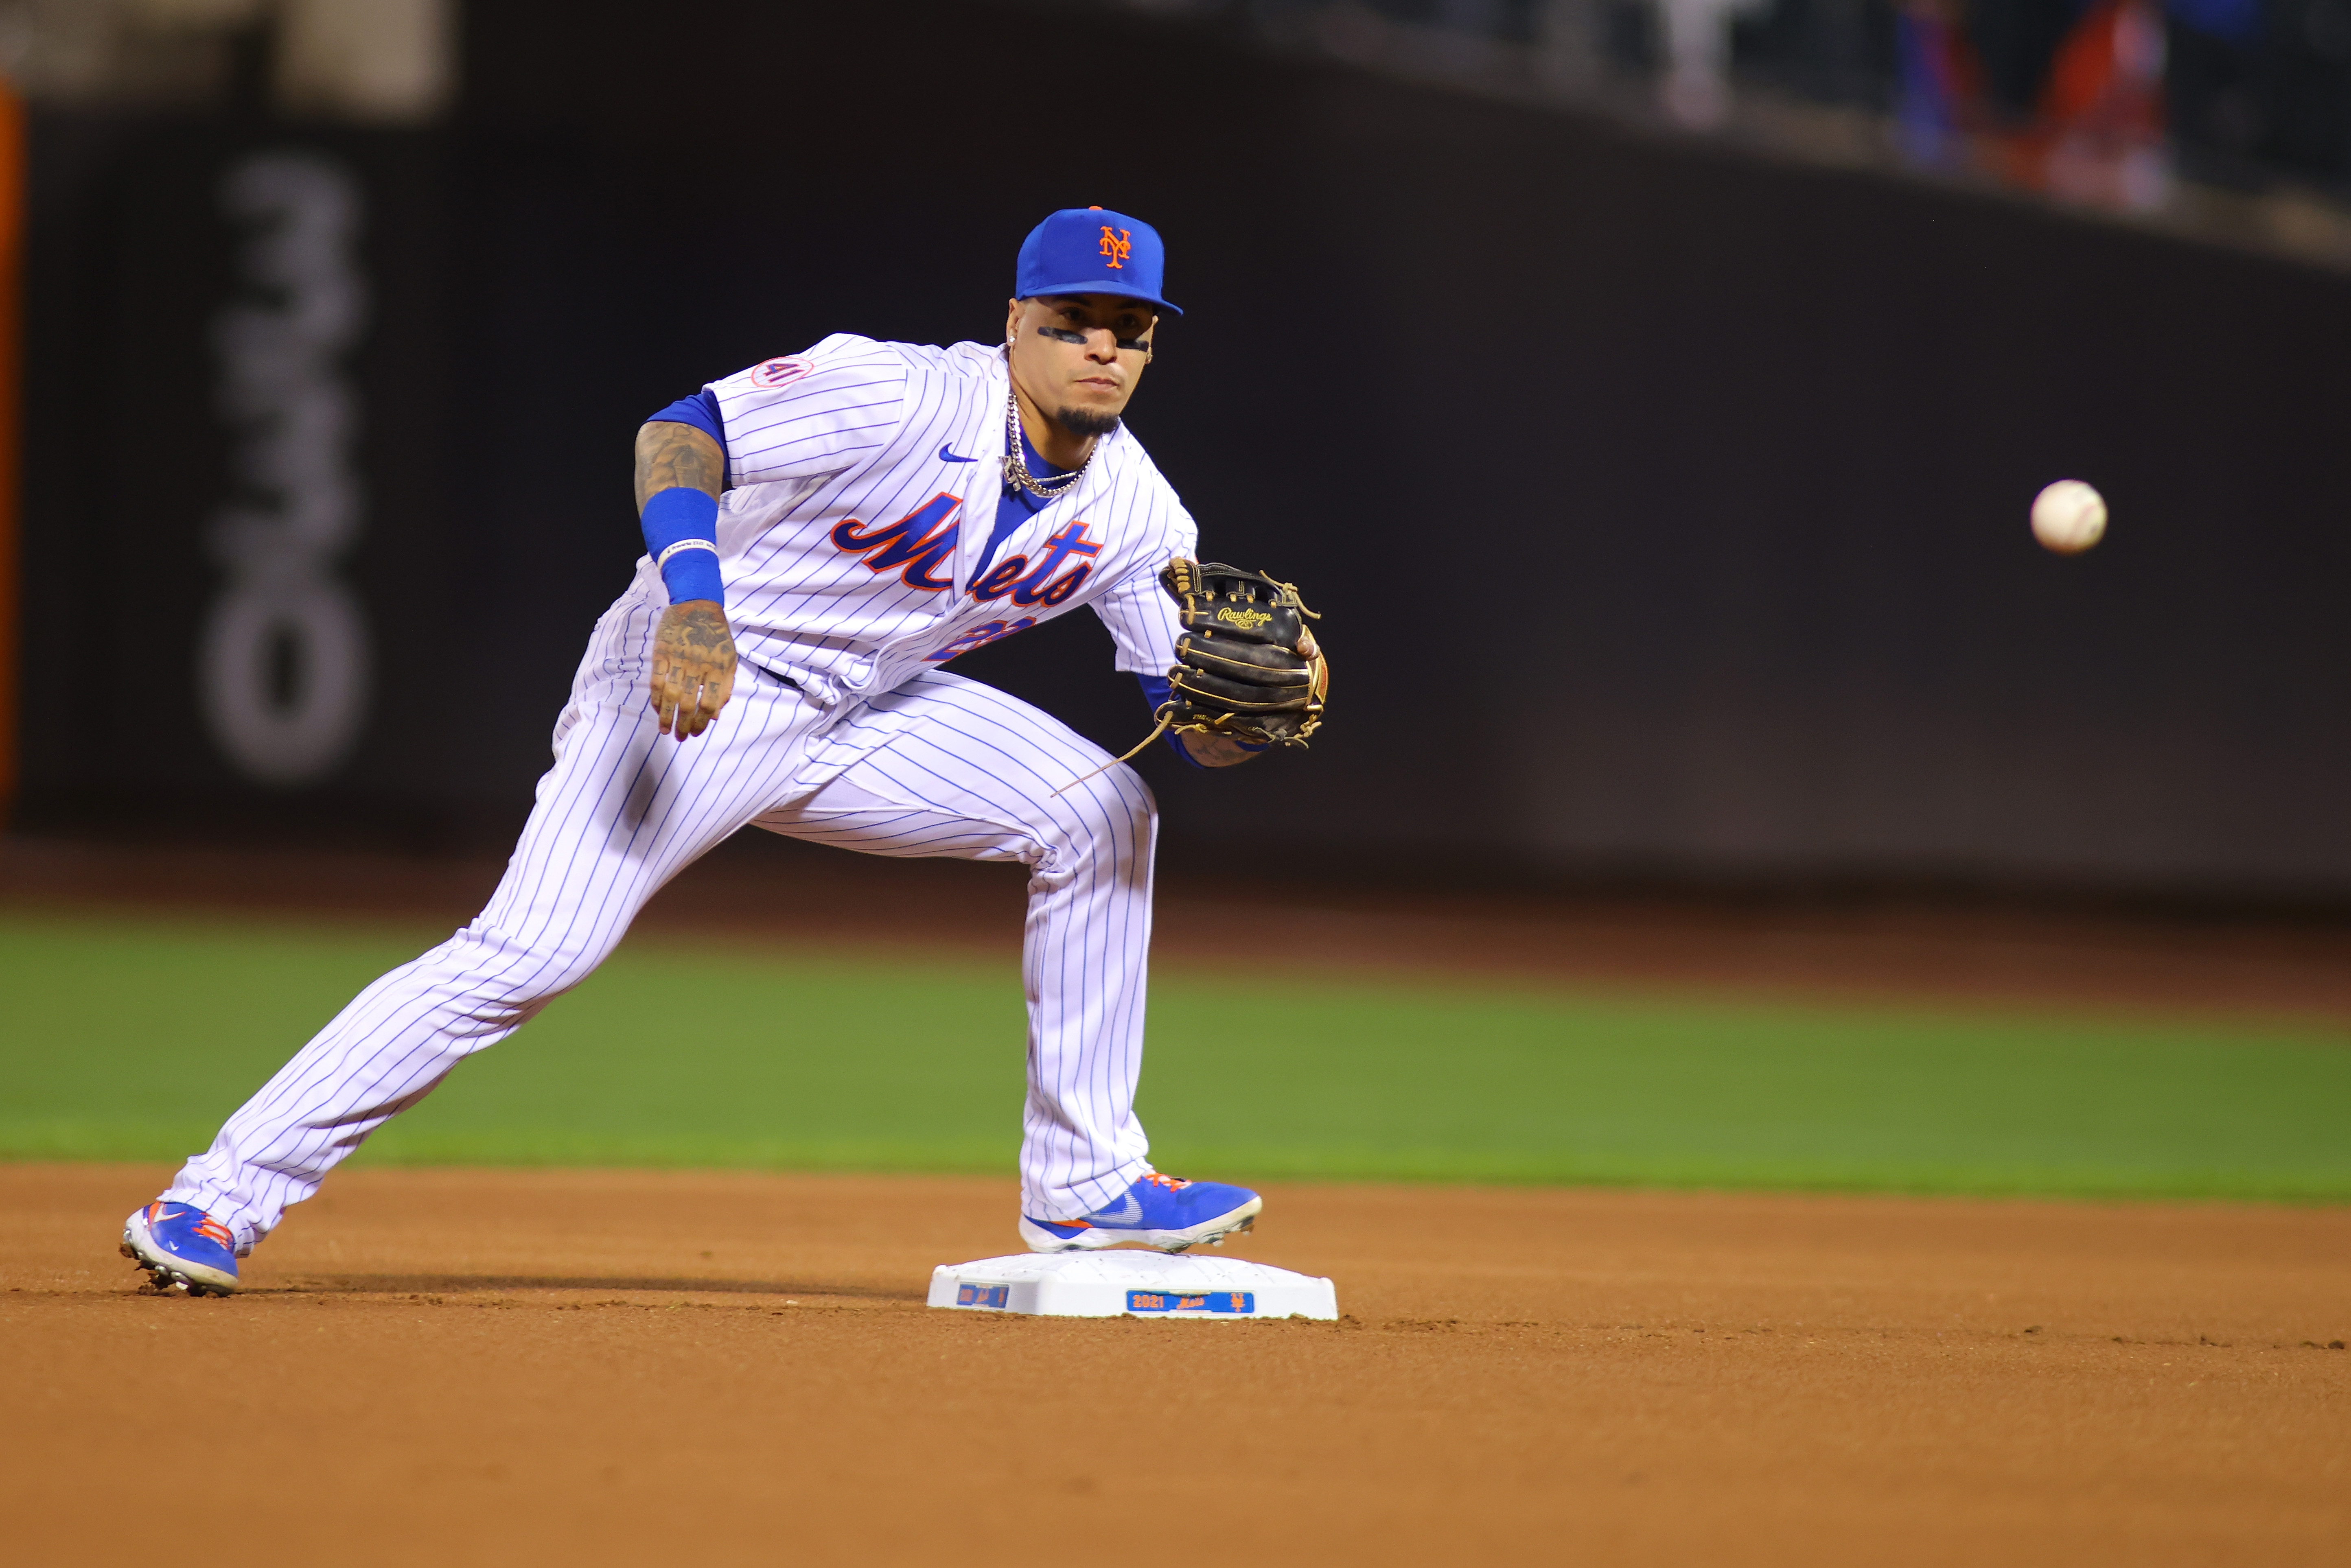 Report: Tigers, SS Javier Báez agree to 6-year, $140 million contract